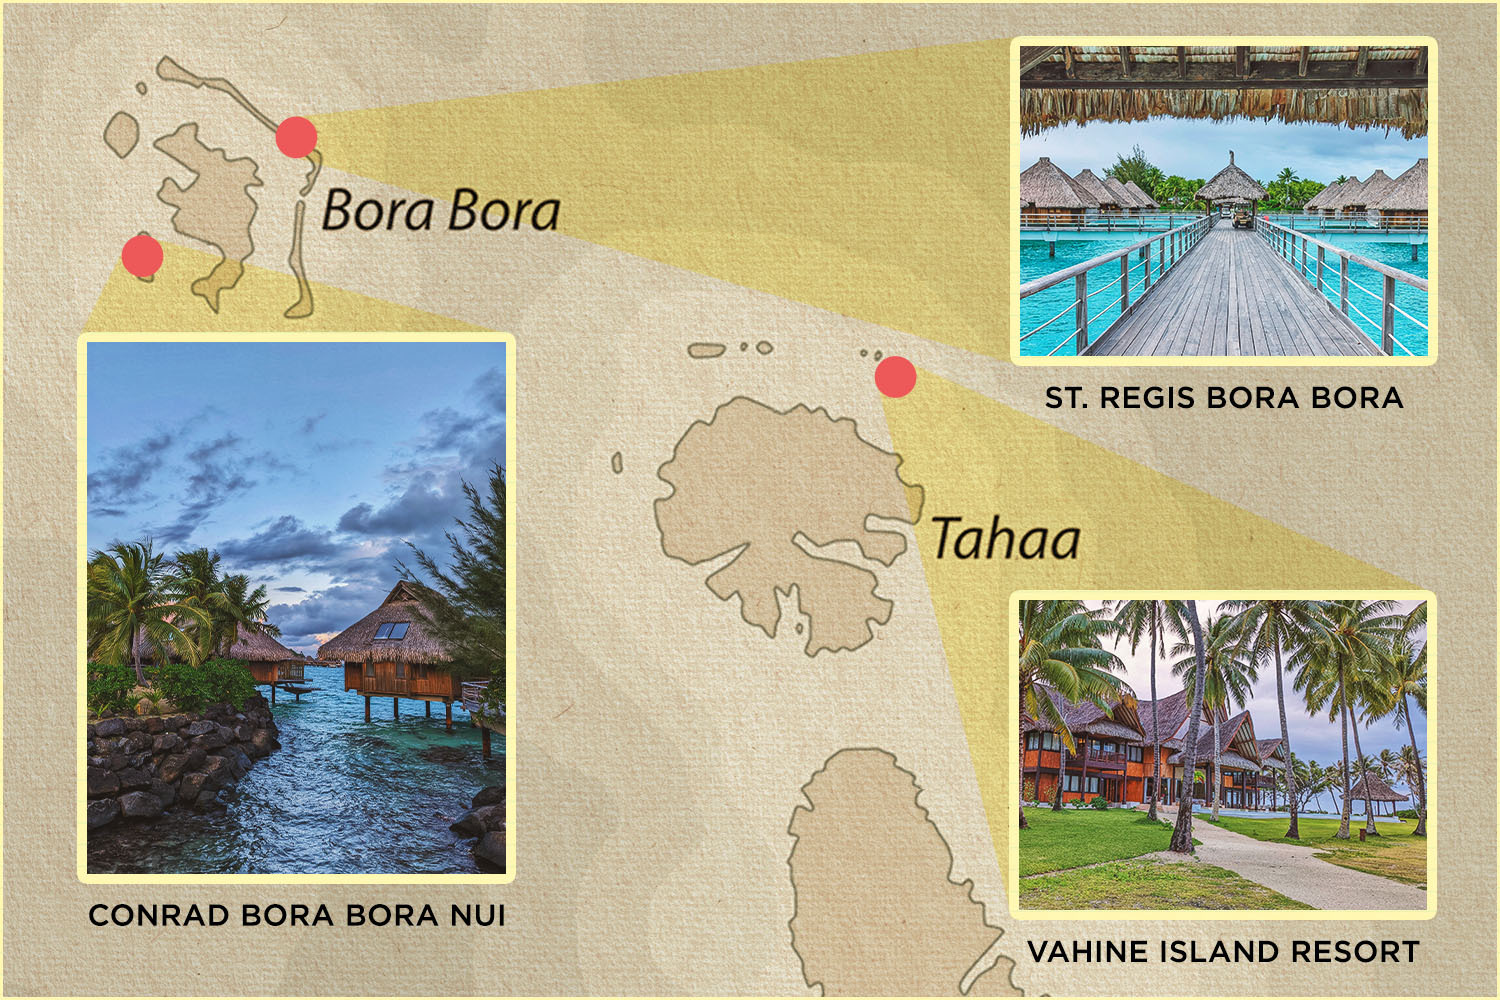 A map of the islands Bora Bora and Taha'a in French Polynesia near Tahiti with photos of resorts in the area